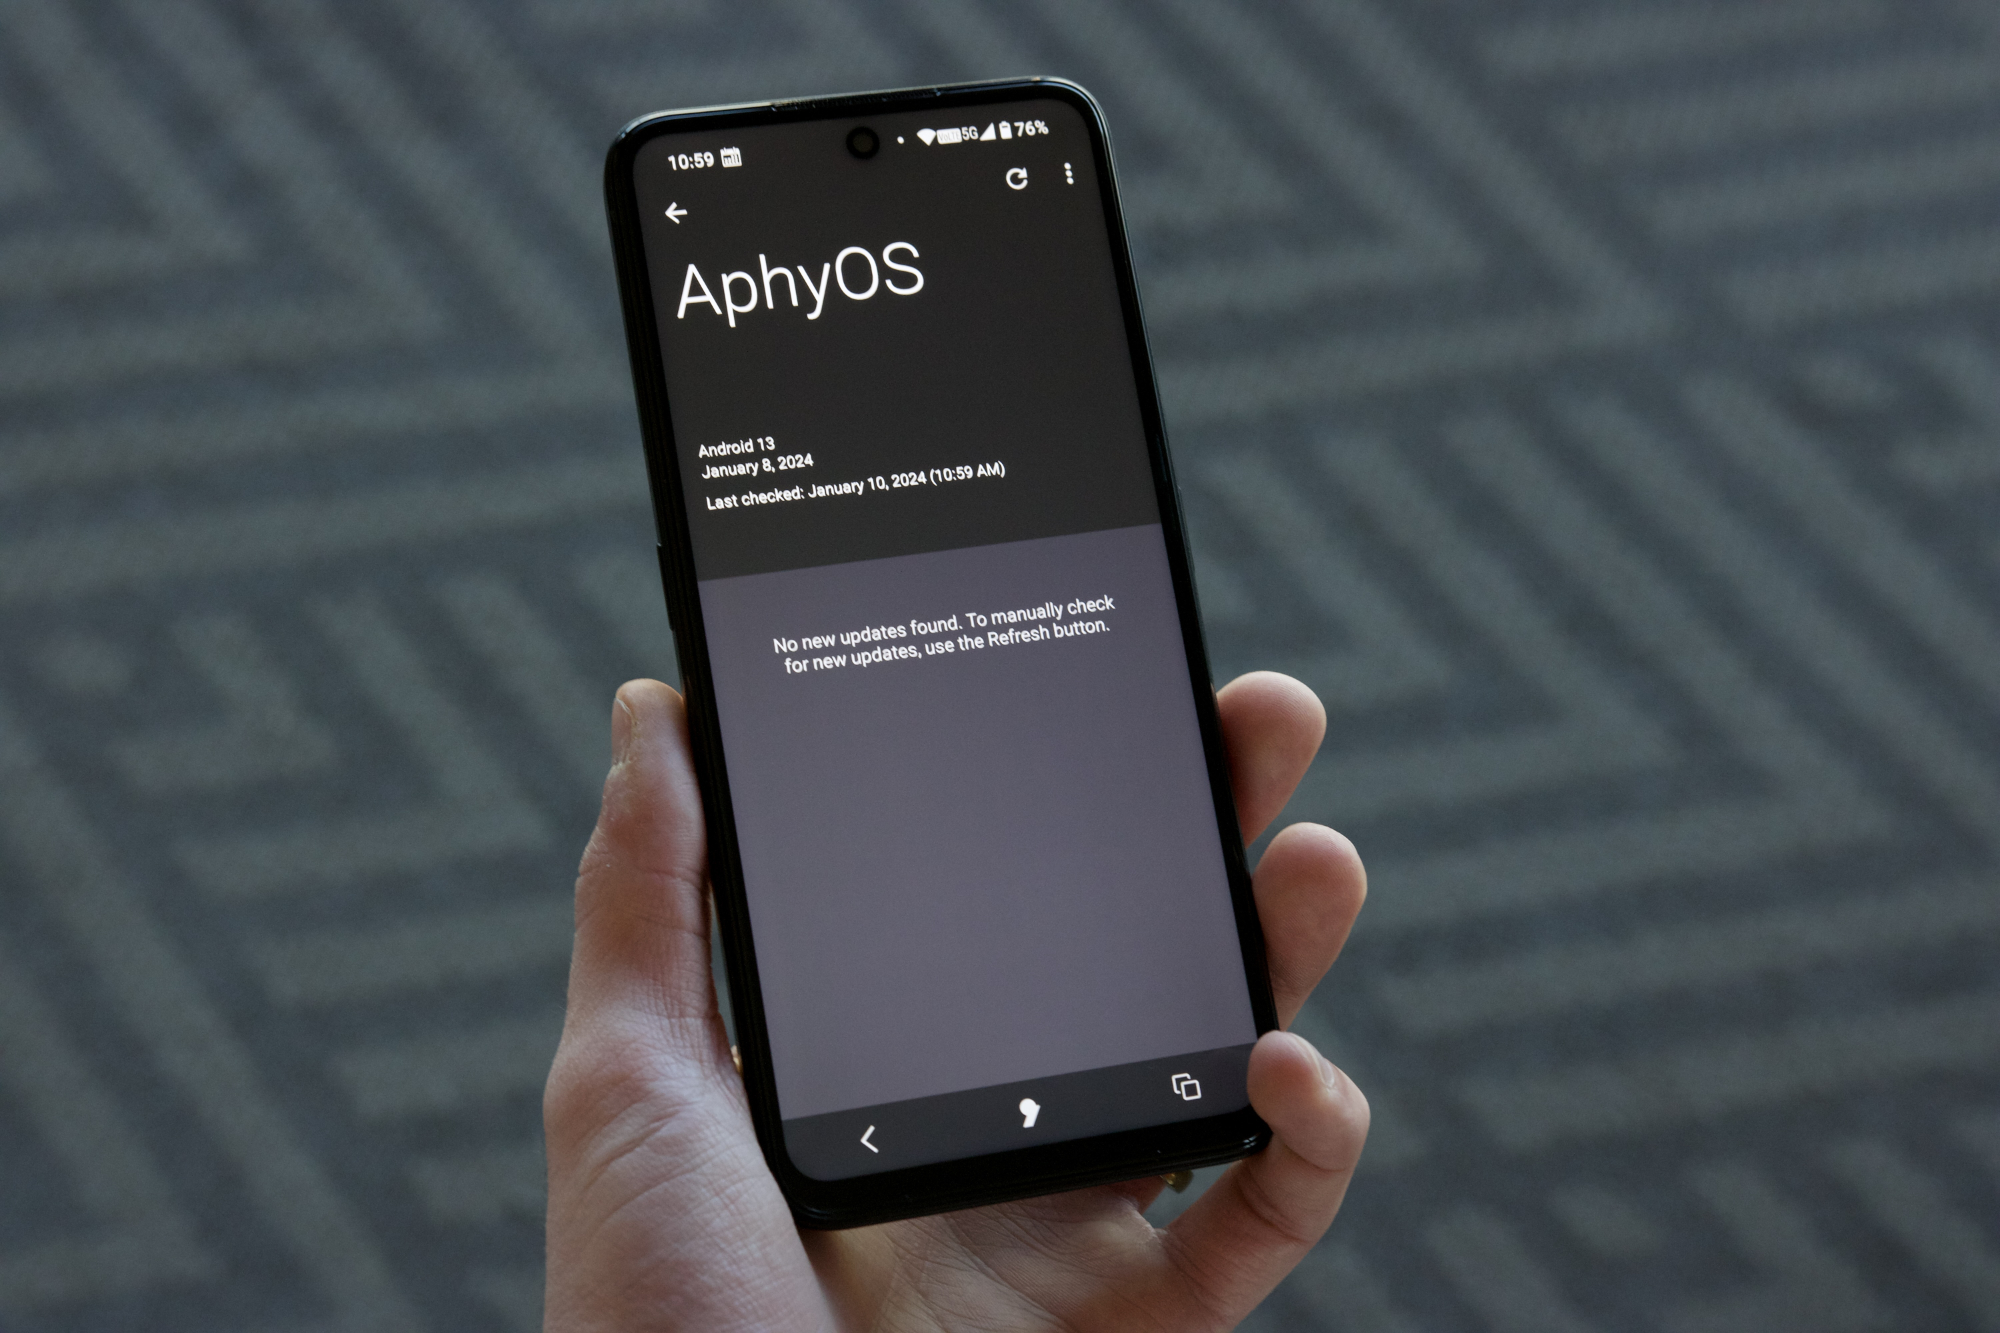 Someone holding a phone running Apostrophy OS, showing the AphyOS page.